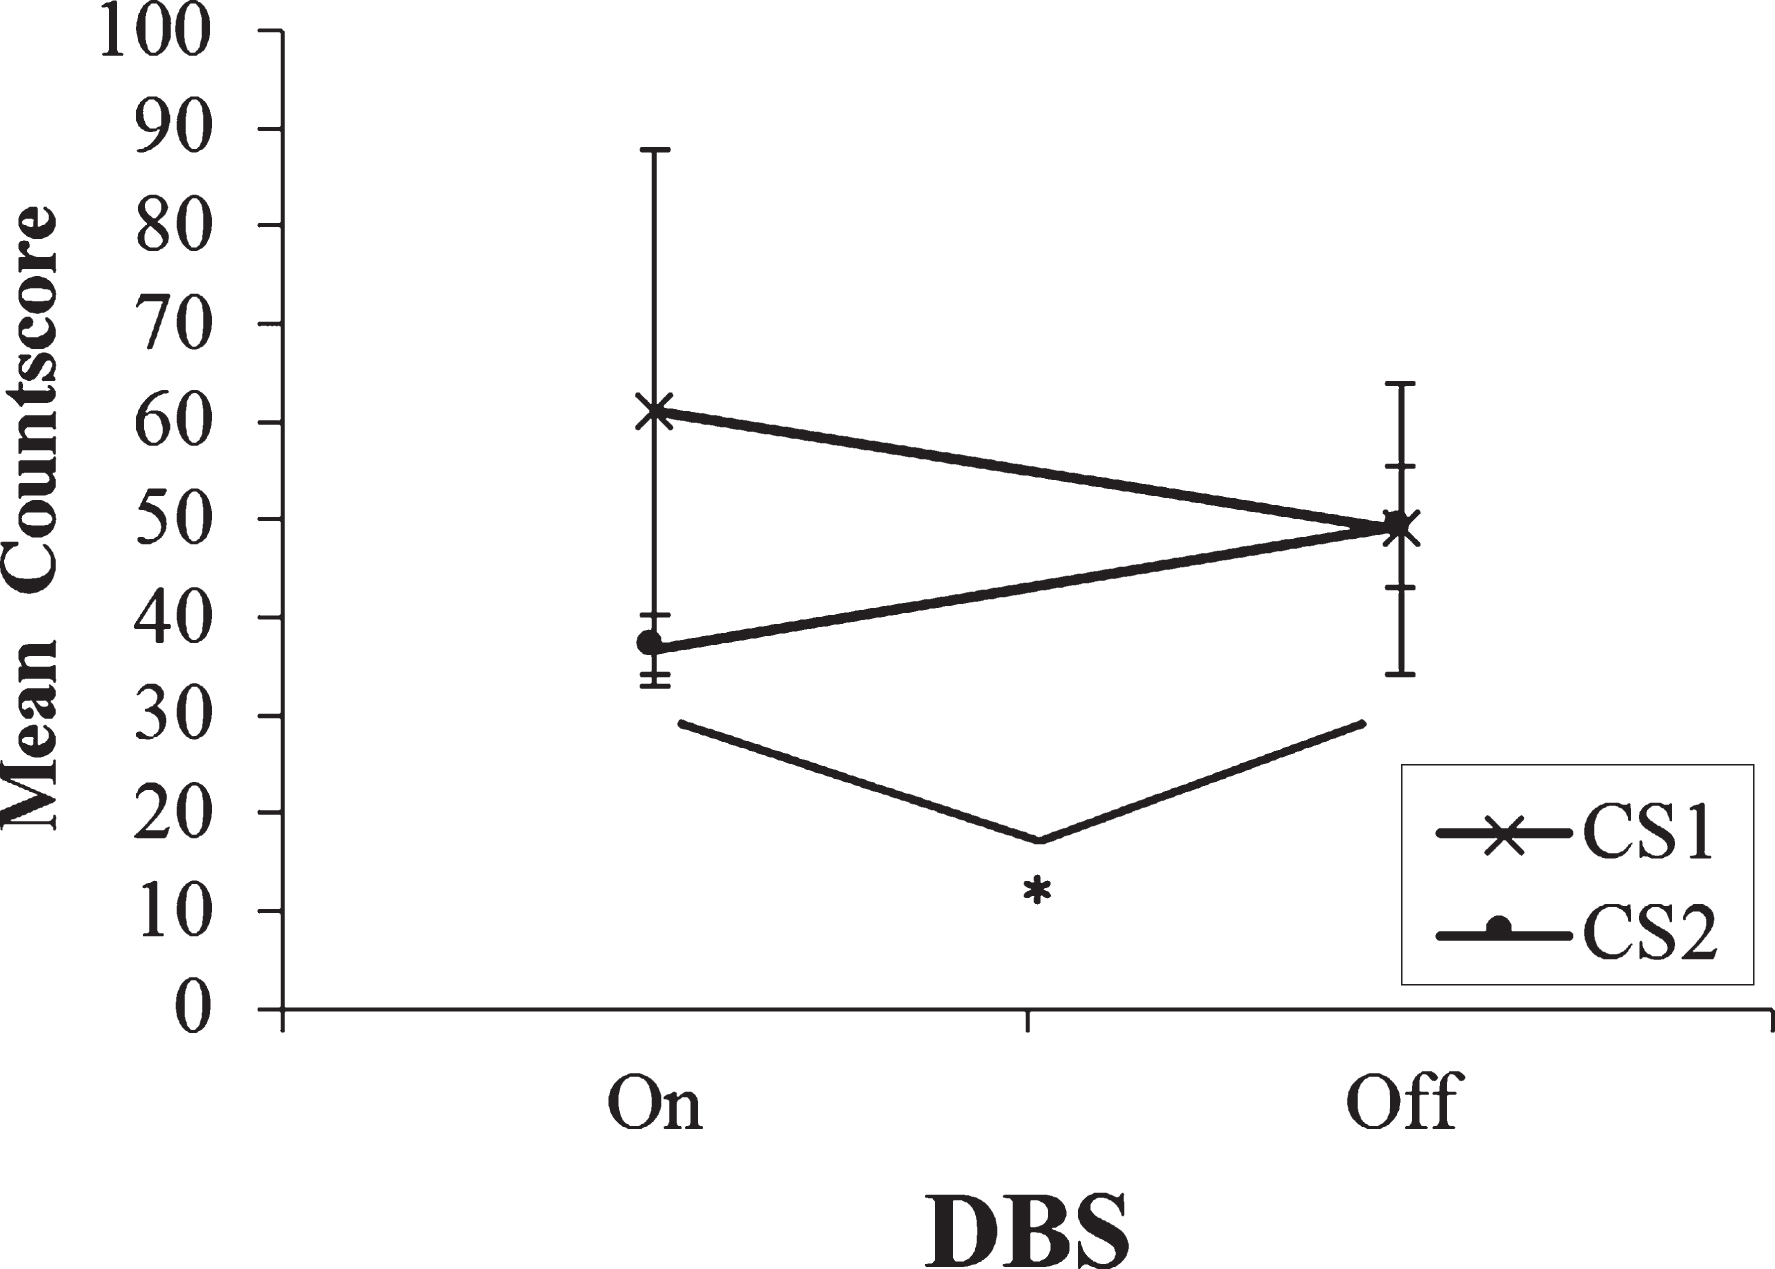 Mean countscore 1 (CS1) and countscore 2 (CS2) at the slowest rate (0.33 Hz) of paced random number generation, with deep brain stimulation (DBS) of the subthalamic nucleus on versus off. Error bars are standard error. An asterisk indicates the comparison between on and off stimulation was significant.